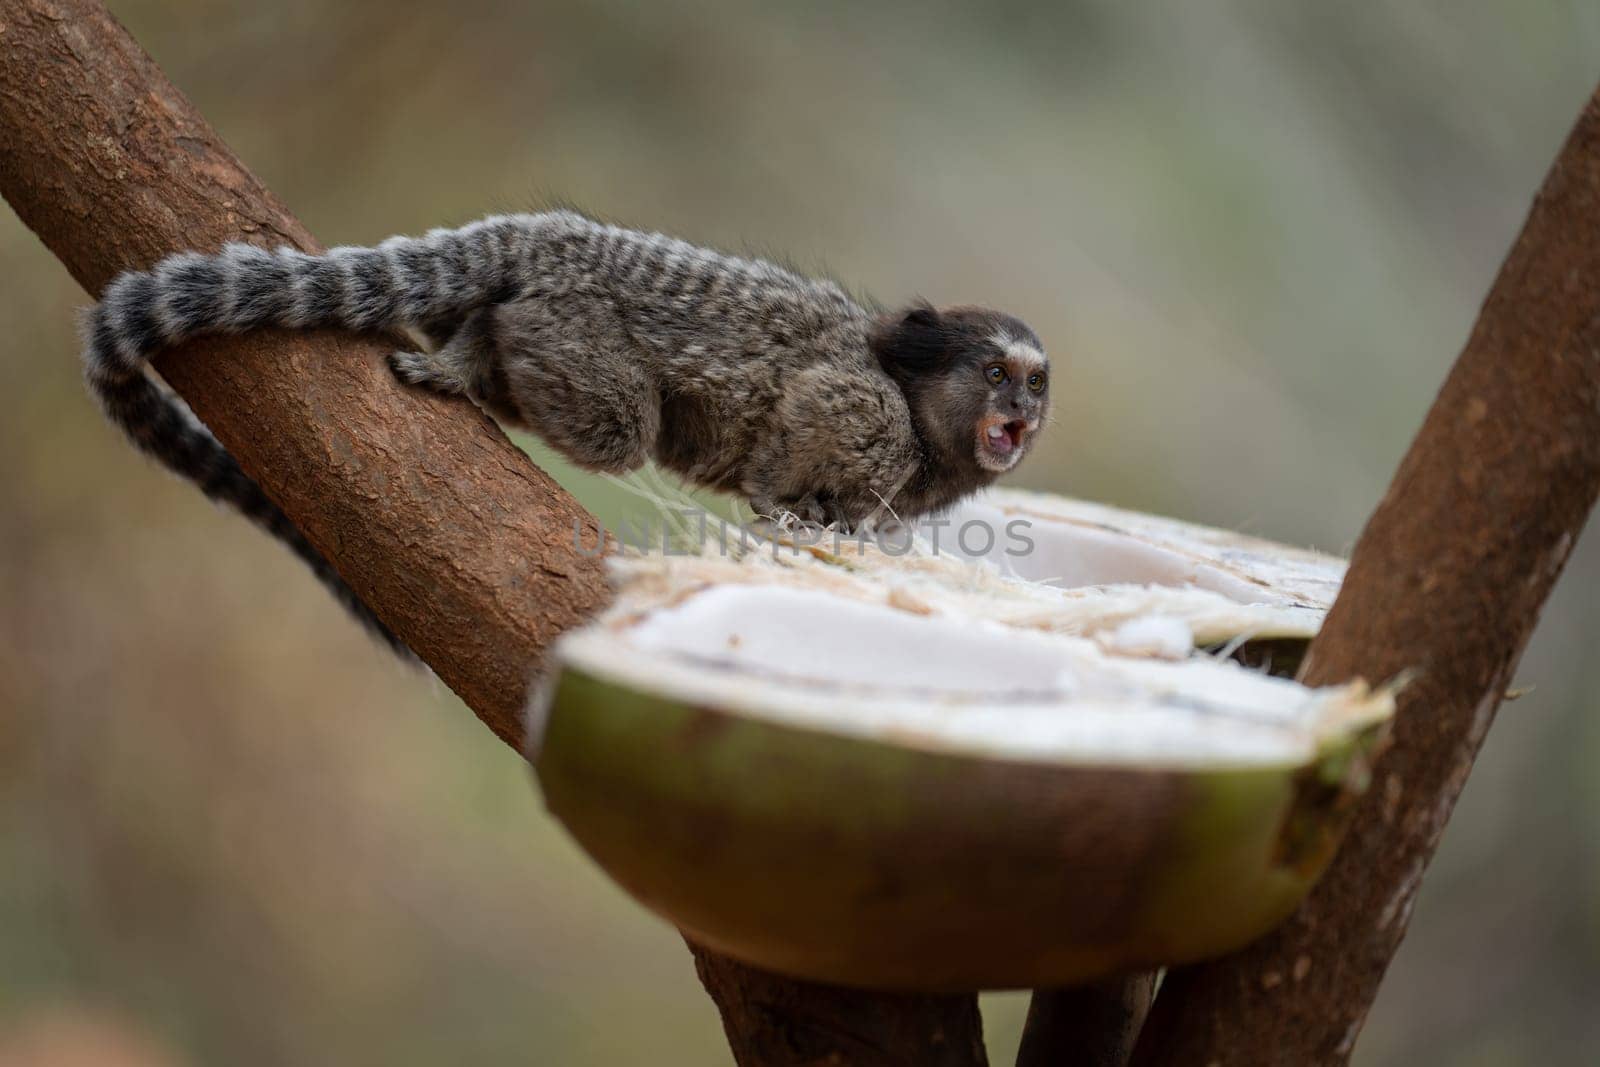 Adorable Small Monkey Eating a Coconut in a Tree, Looking Out for Rivals by FerradalFCG